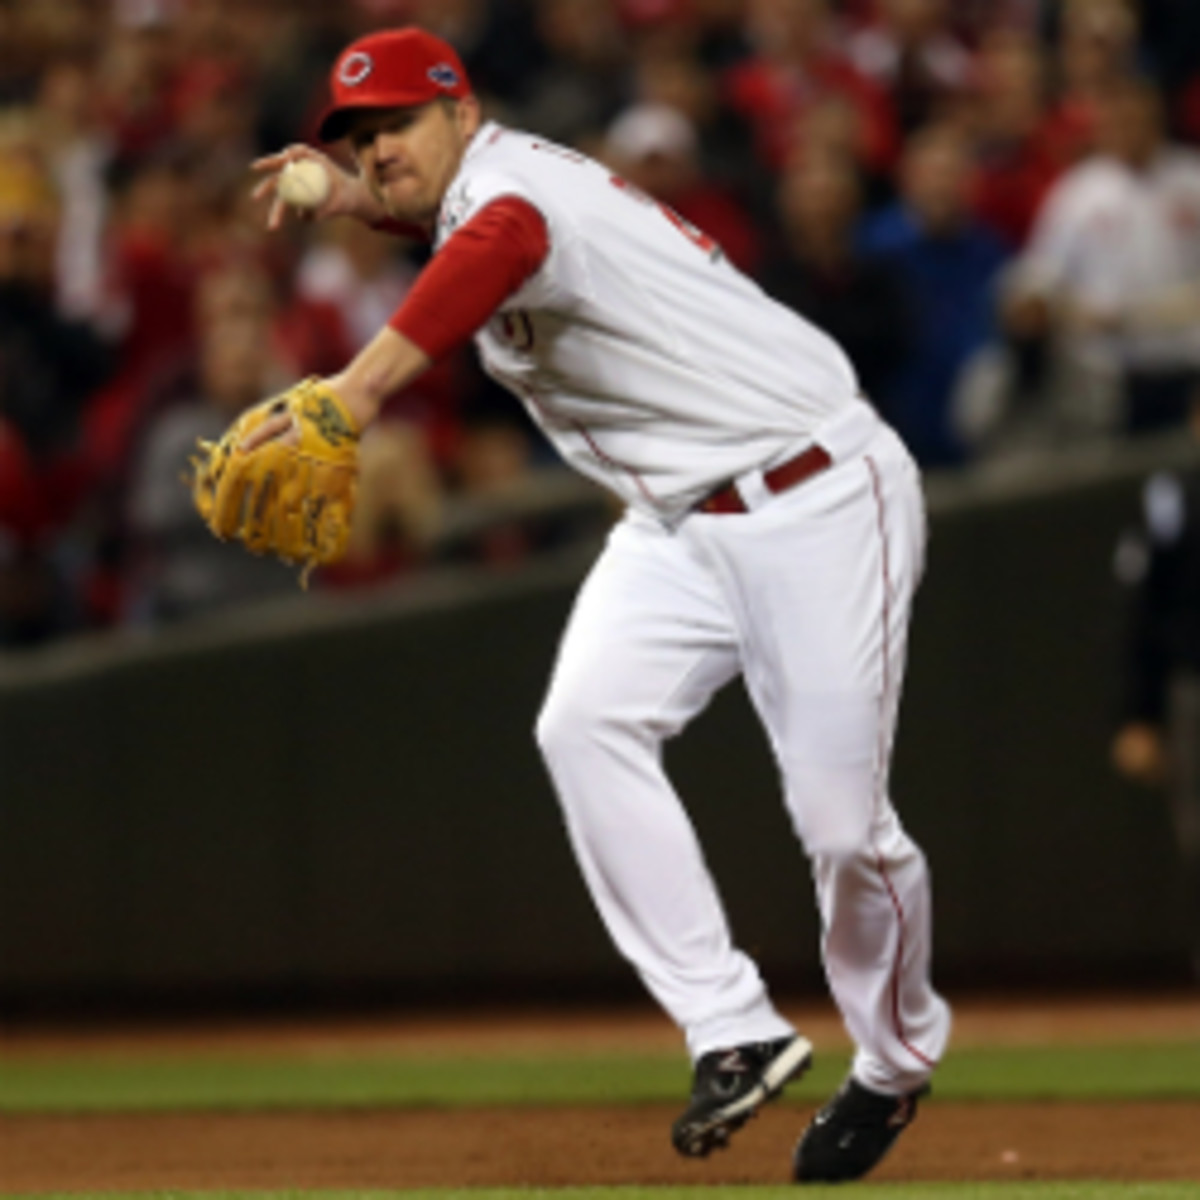 Scott Rolen could return to play with the Reds this season. (Jonathan Daniel/Getty Images)